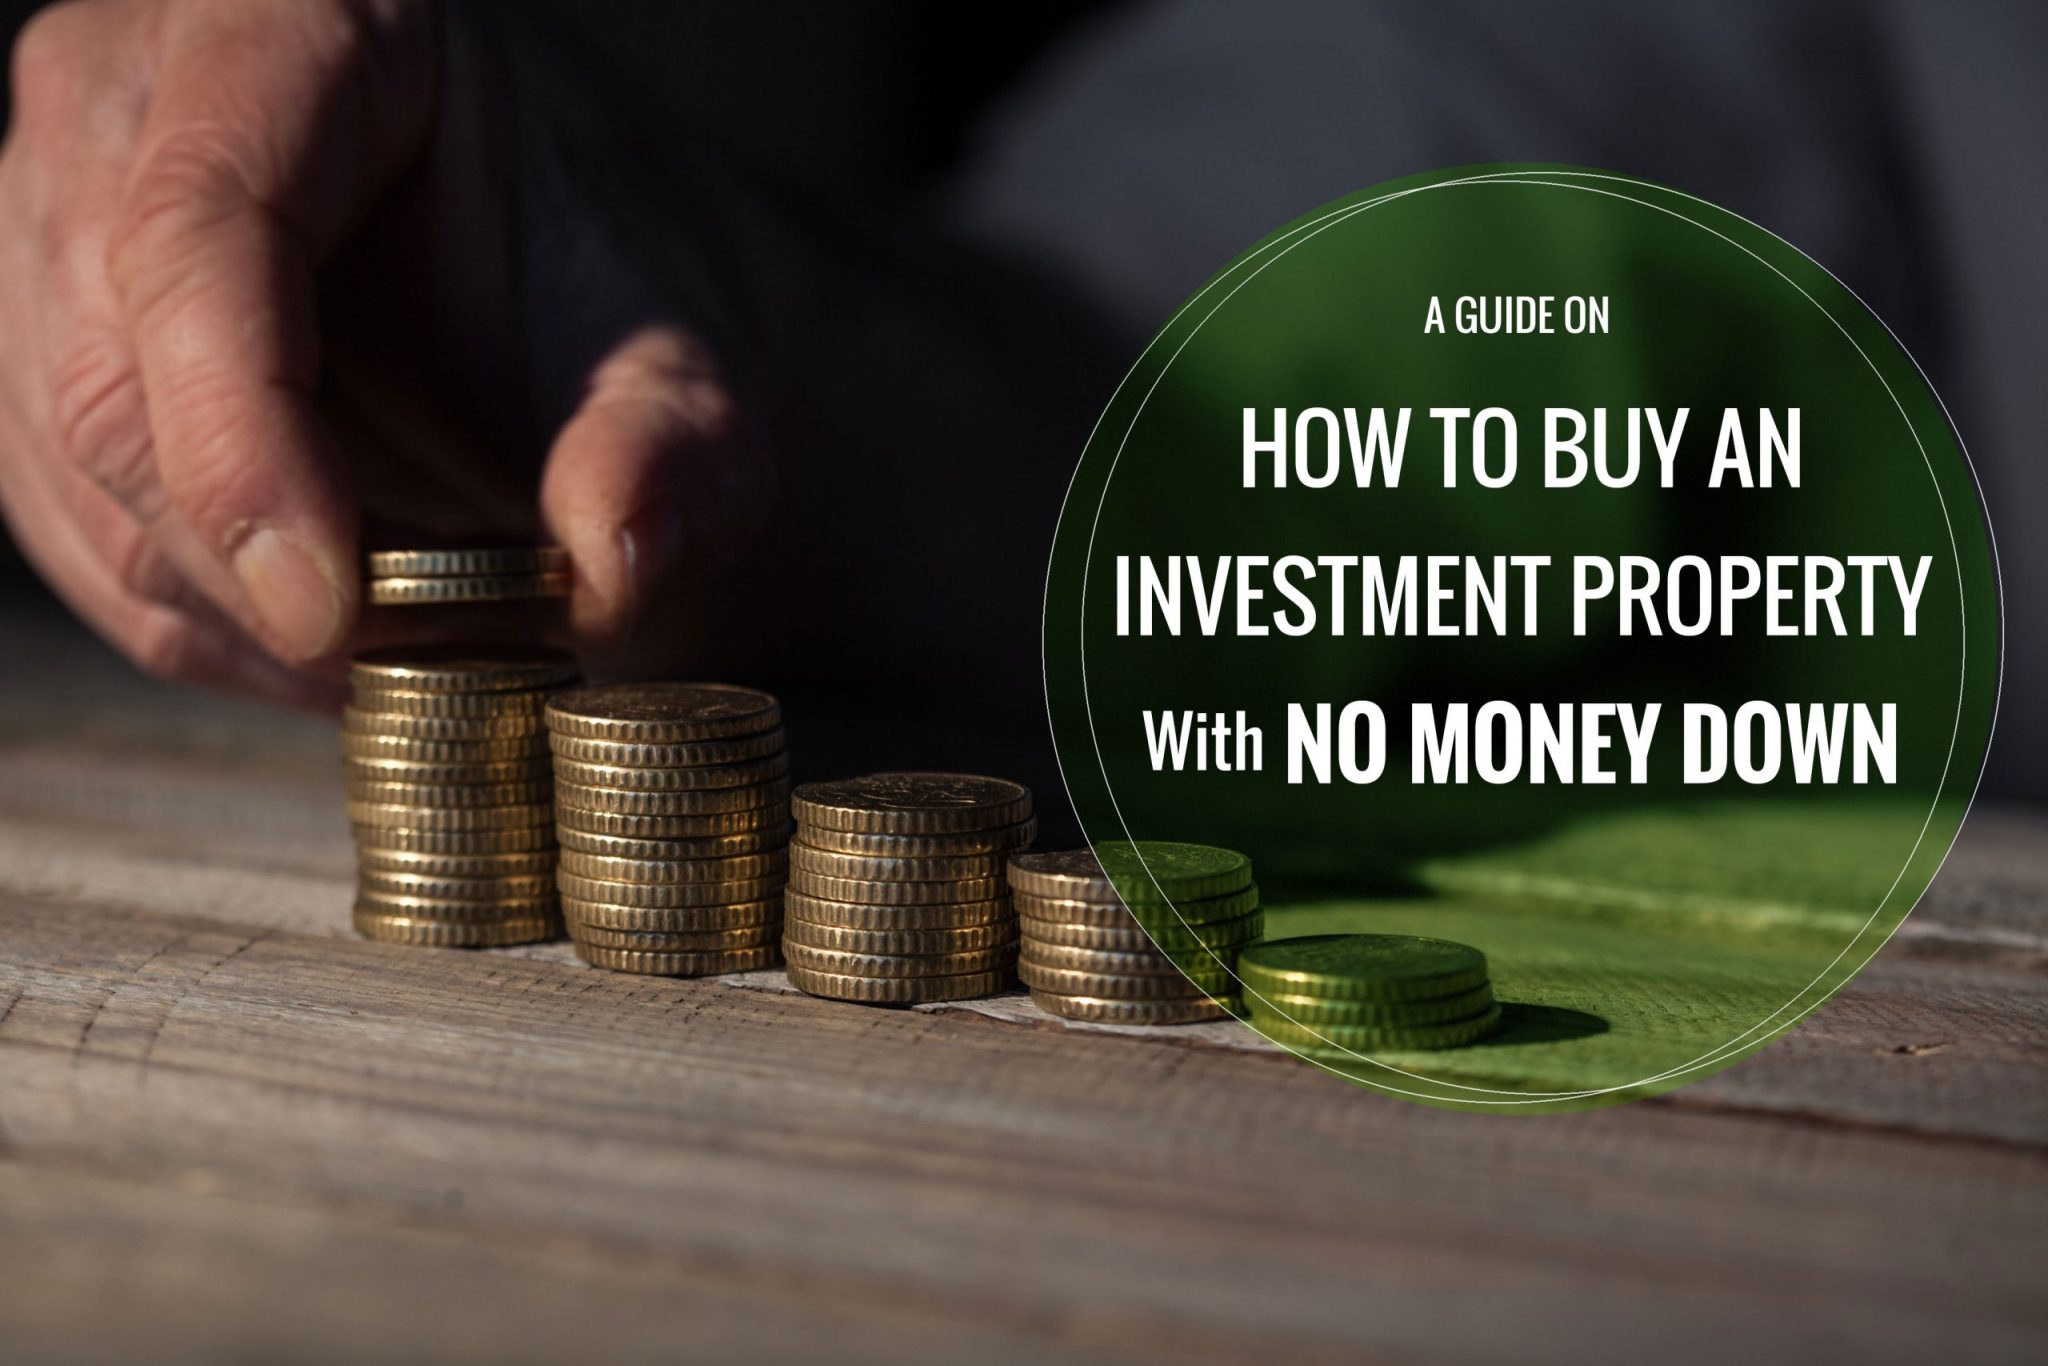 A Guide On How To Buy An Investment Property With No Money Down